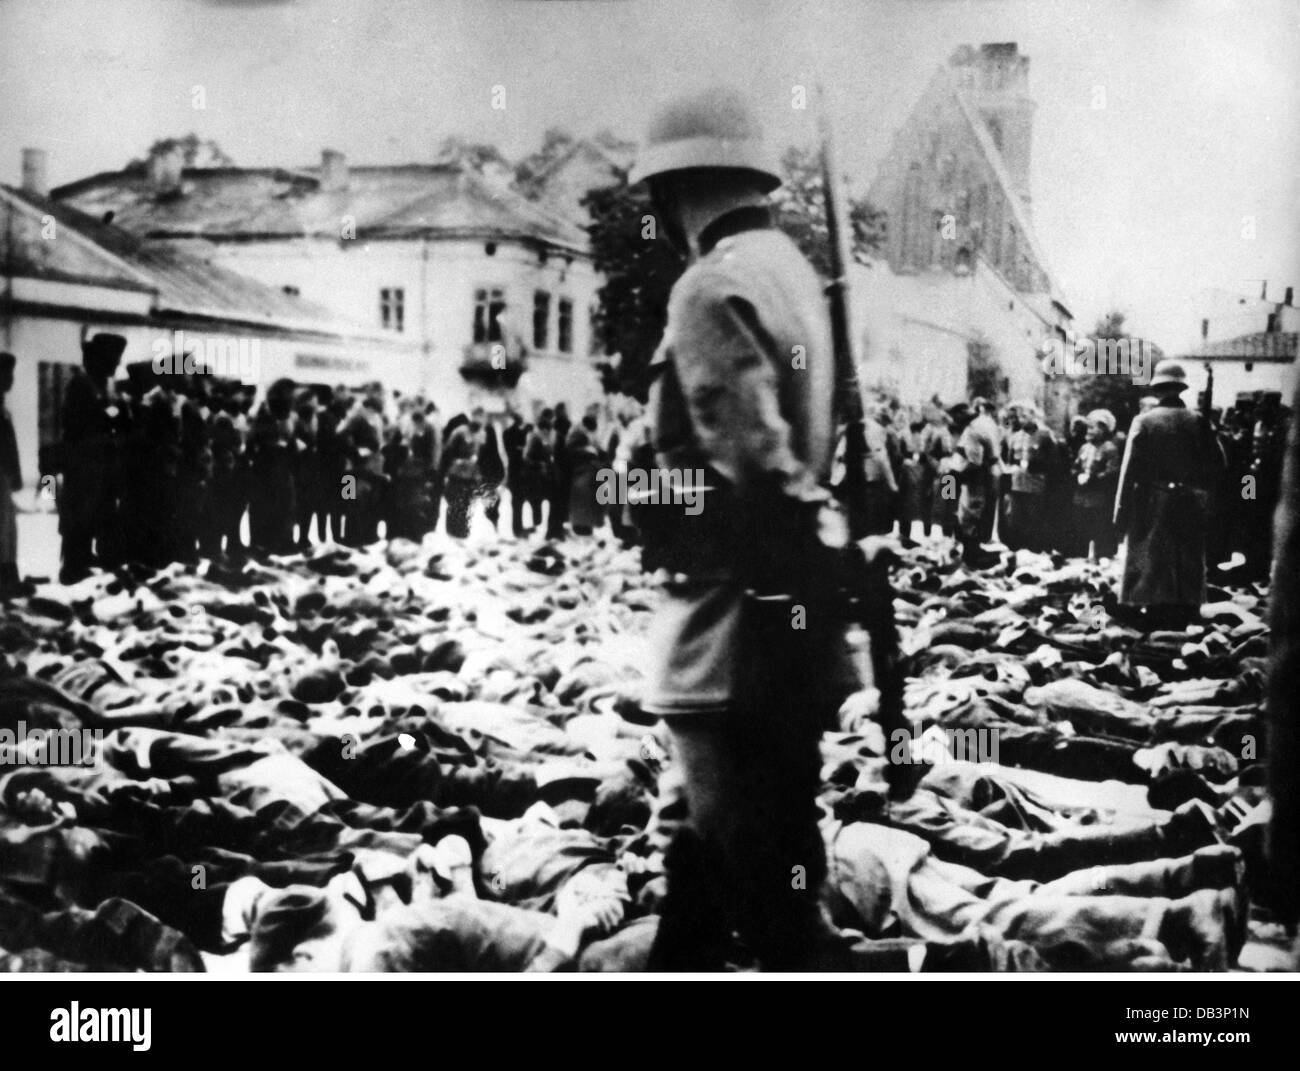 events, Second World War / WWII, Poland, German occupation, first executions, 1939, Additional-Rights-Clearences-Not Available Stock Photo